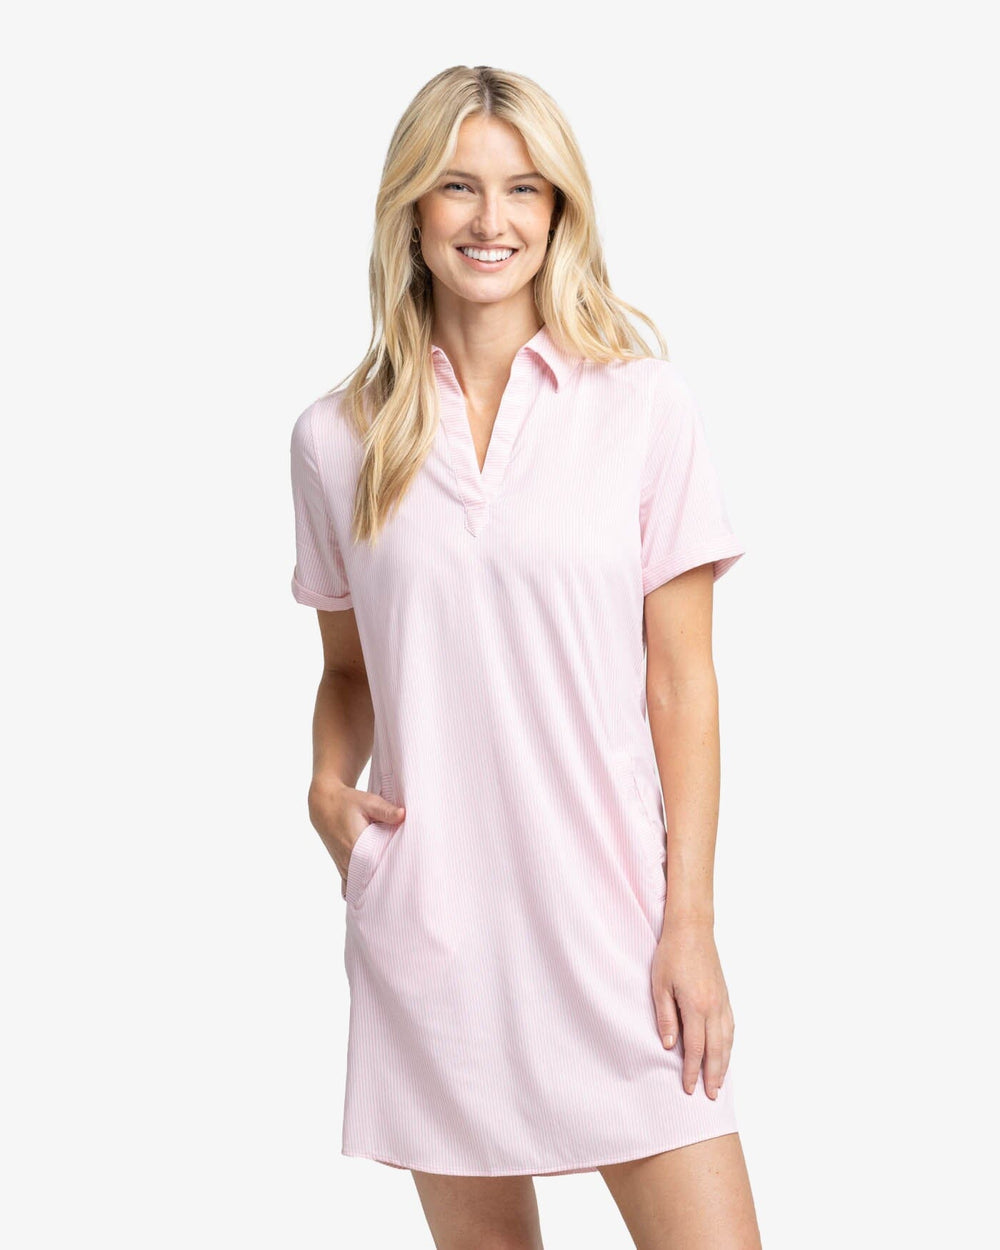 The front view of the Southern Tide Kamryn brrr°® Intercoastal Stripe Dress by Southern Tide - Flamingo Pink